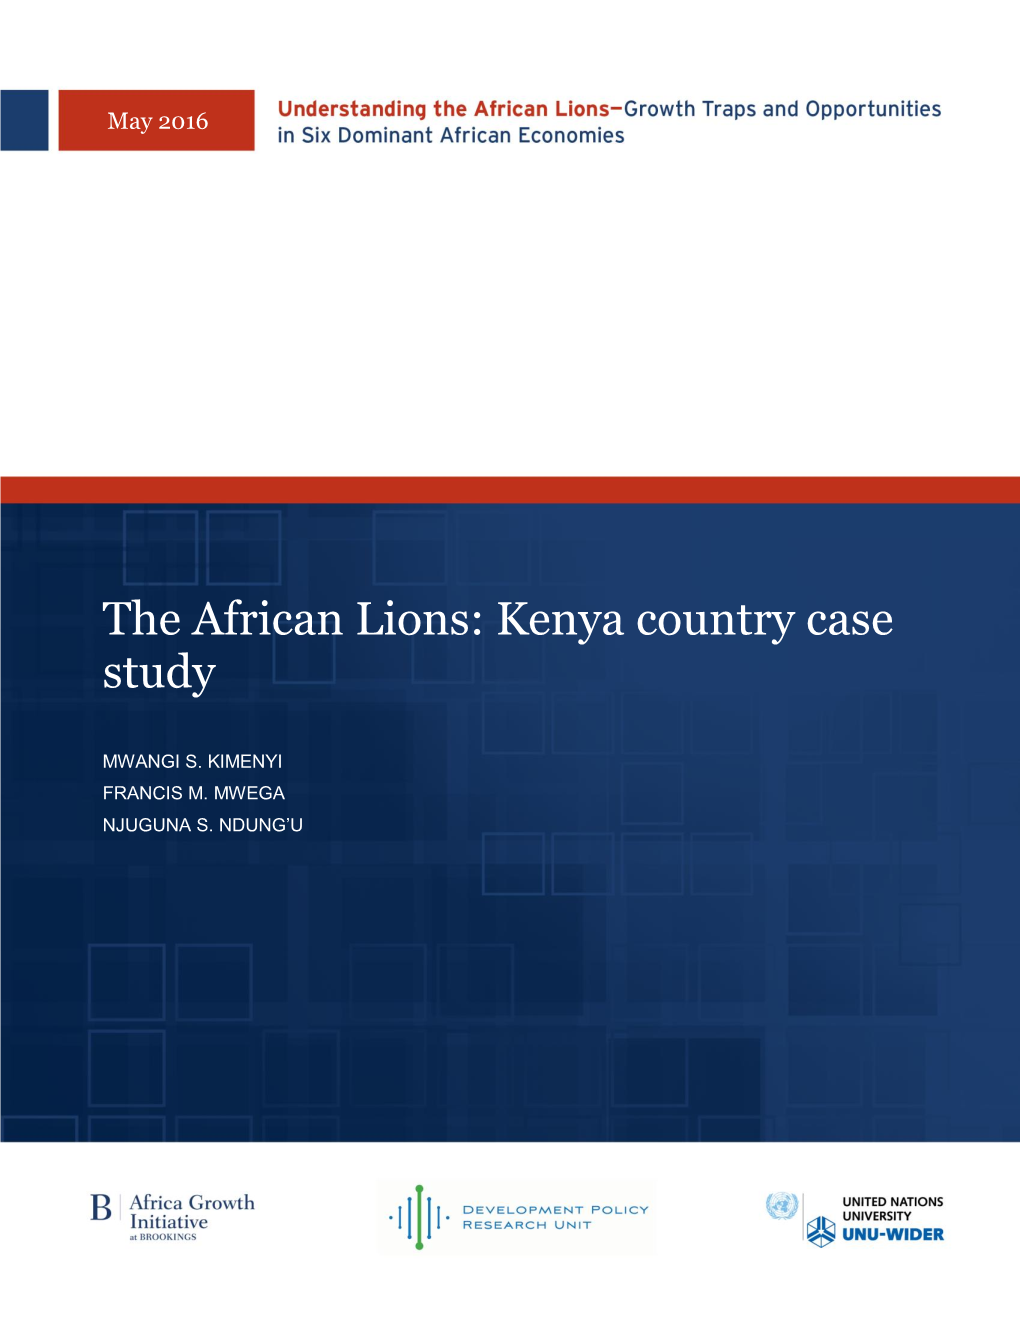 The African Lions: Kenya Country Case Study